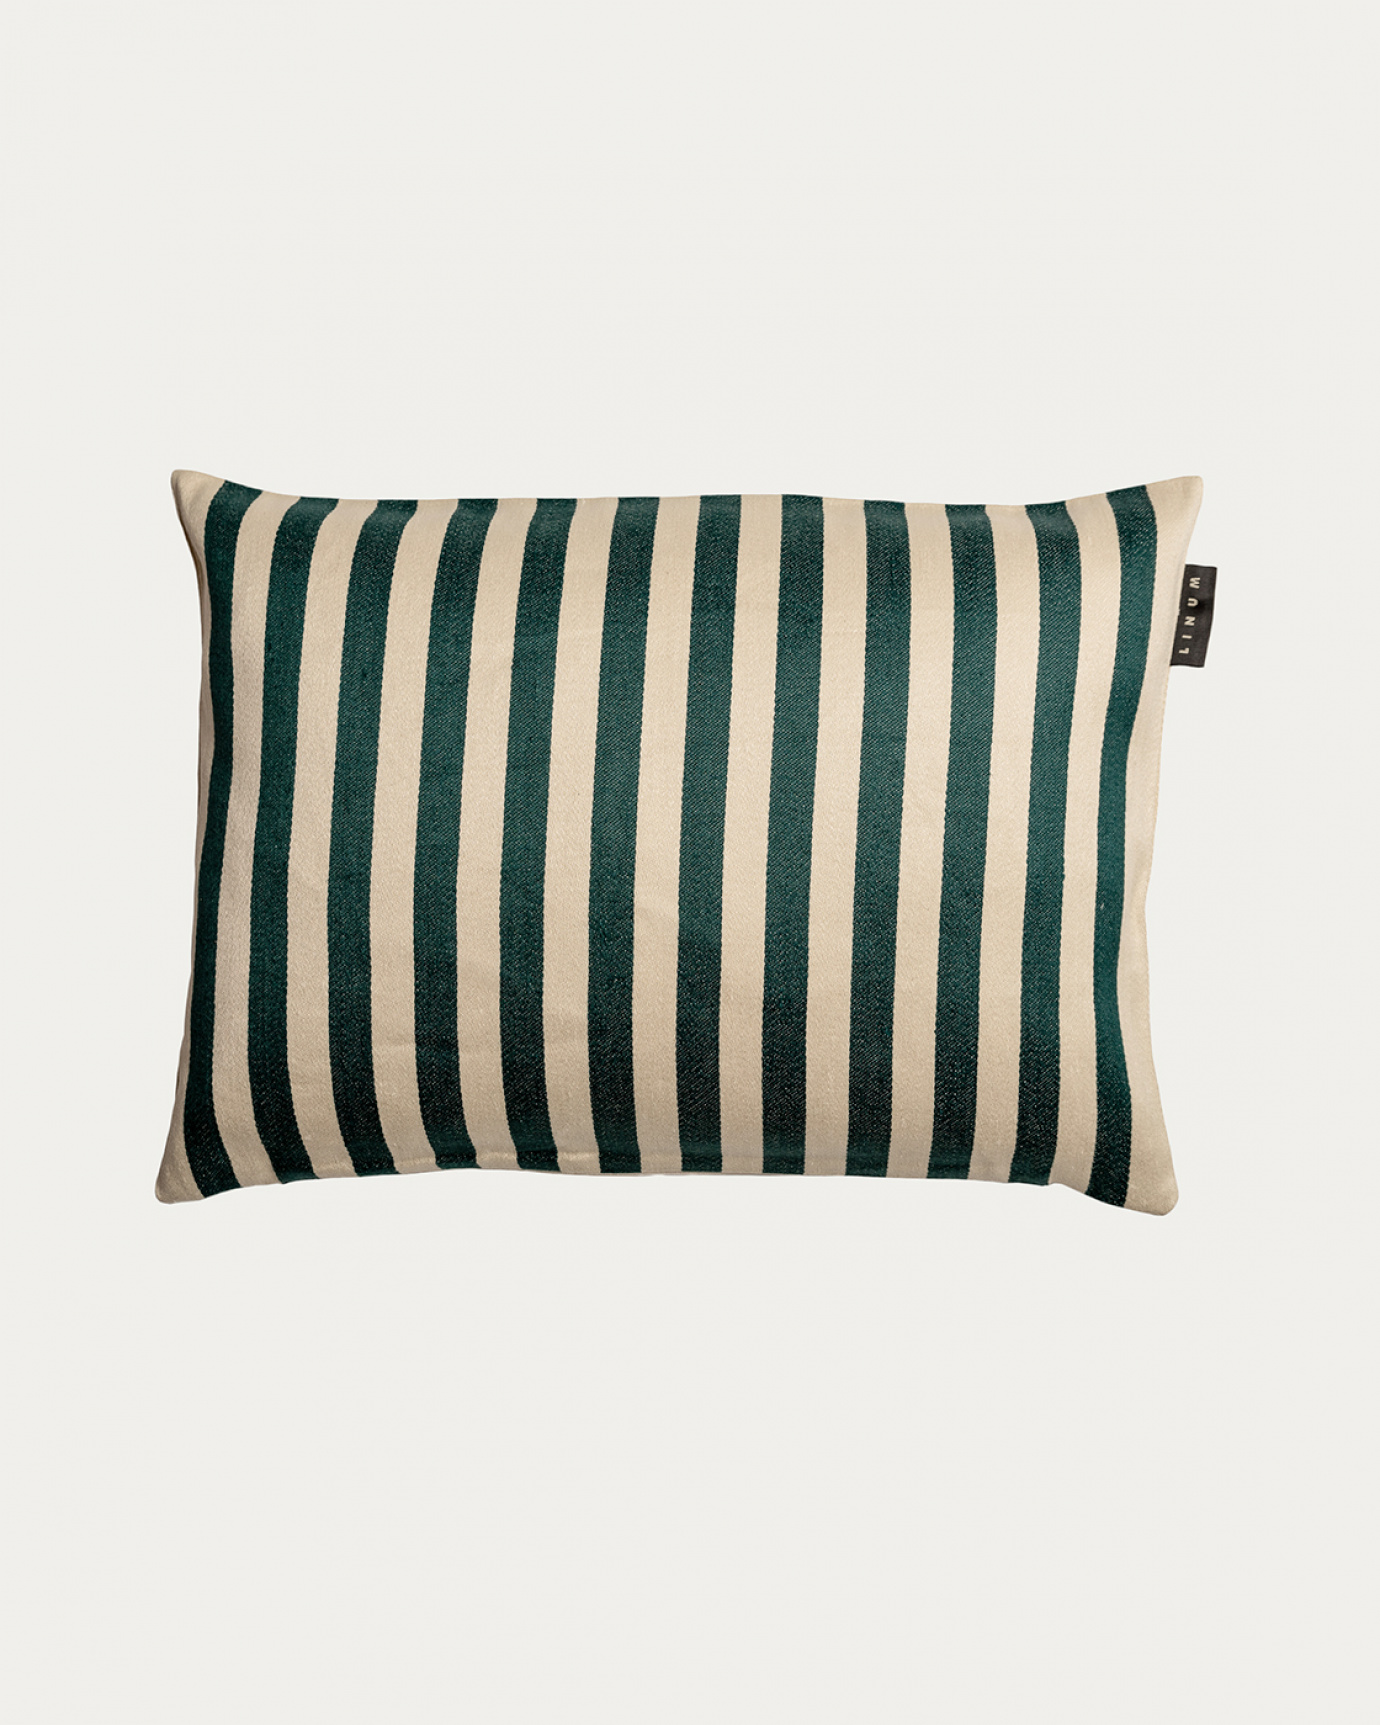 Product image deep emerald green AMALFI cushion cover with wide stripes made of 77% linen and 23% cotton from LINUM DESIGN. Size 35x50 cm.